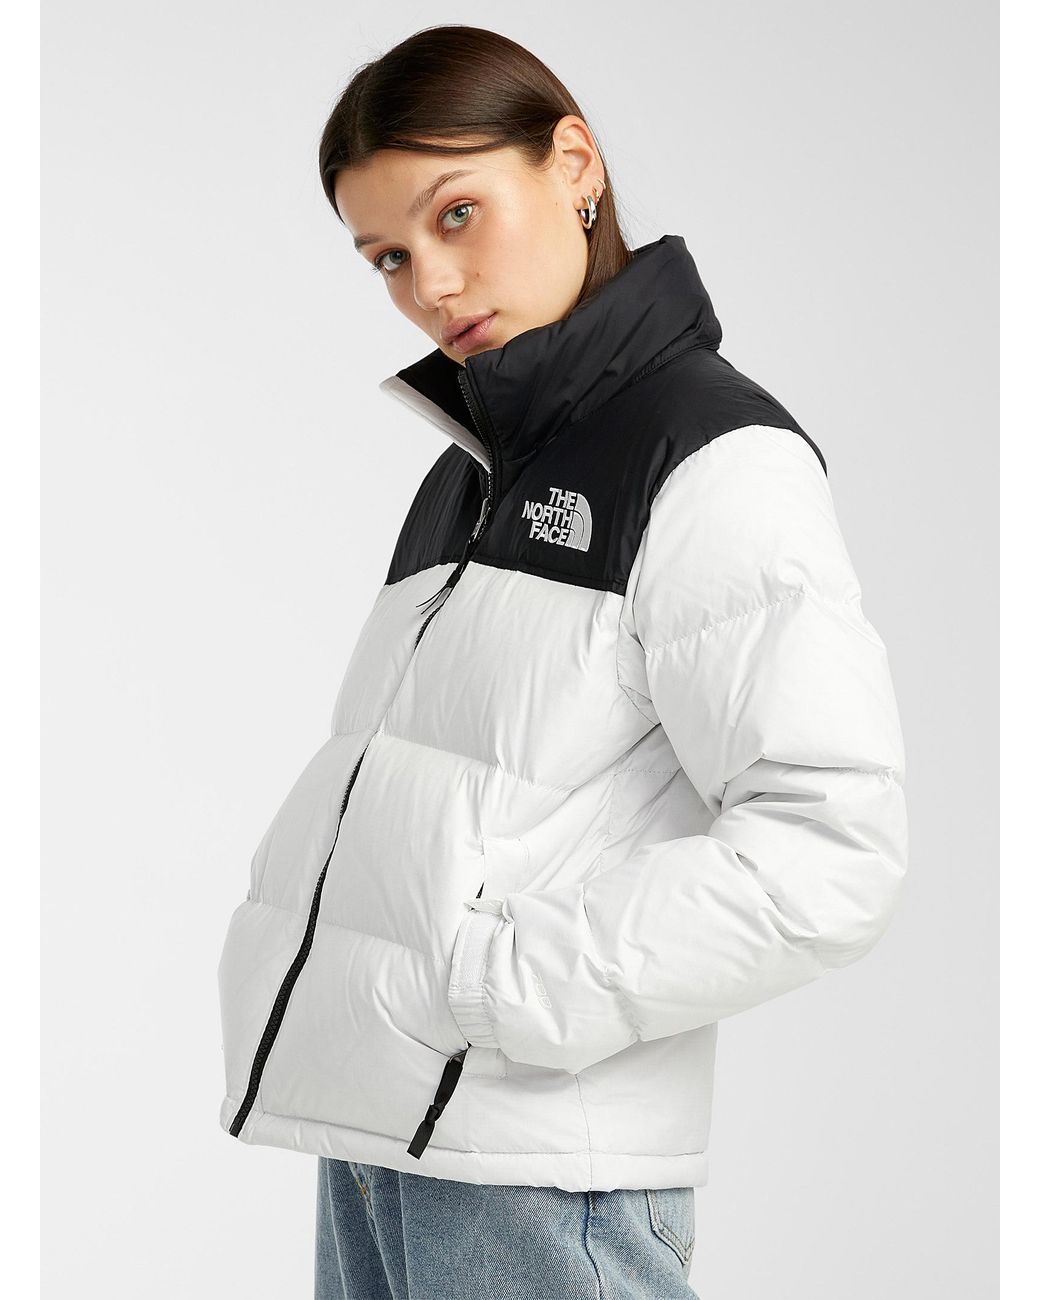 The North Face 1996 Retro Nuptse Puffer Jacket in White | Lyst